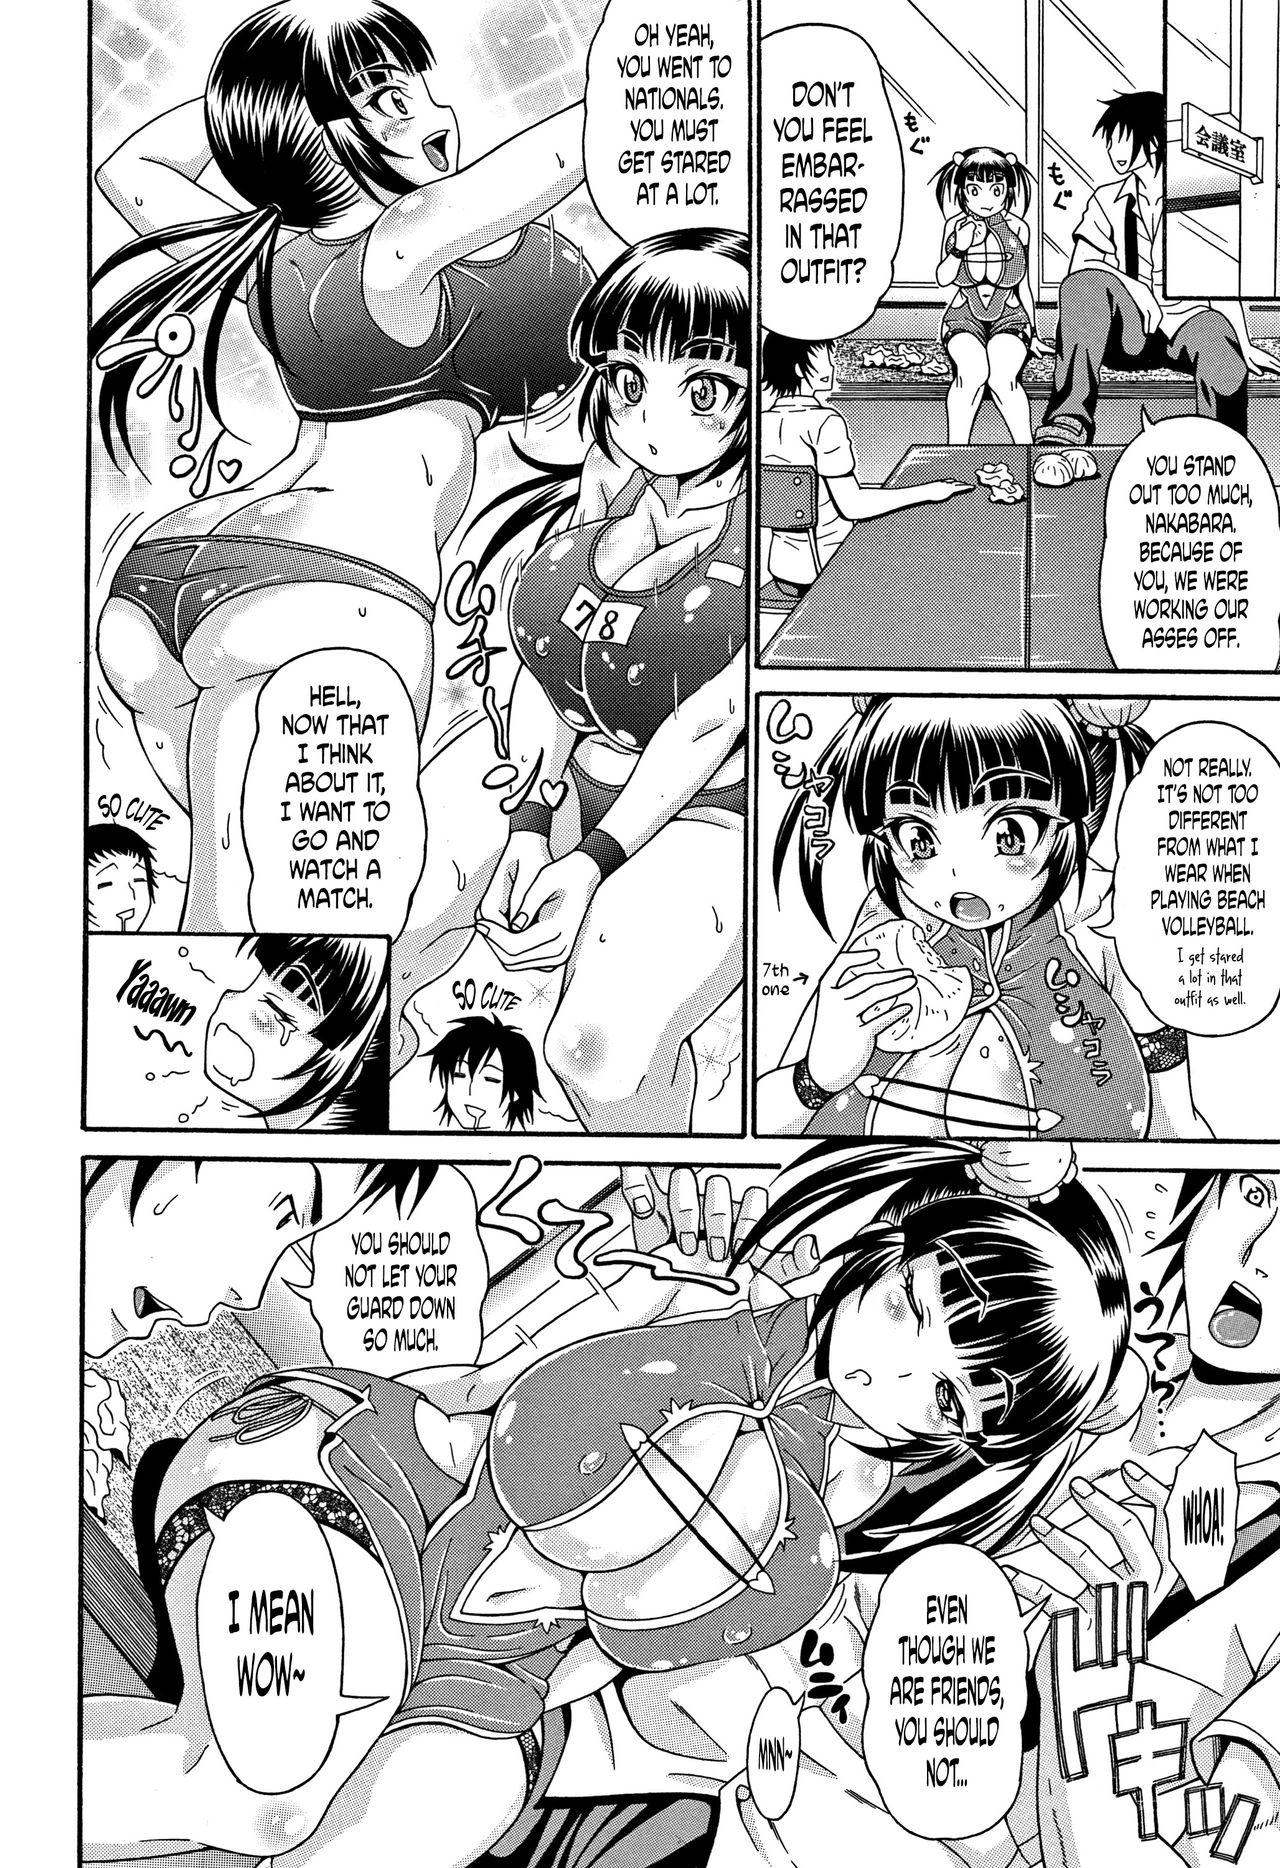 [Andou Hiroyuki] Mamire Chichi - Sticky Tits Feel Hot All Over. Ch.1-11 [English] [doujin-moe.us] 92